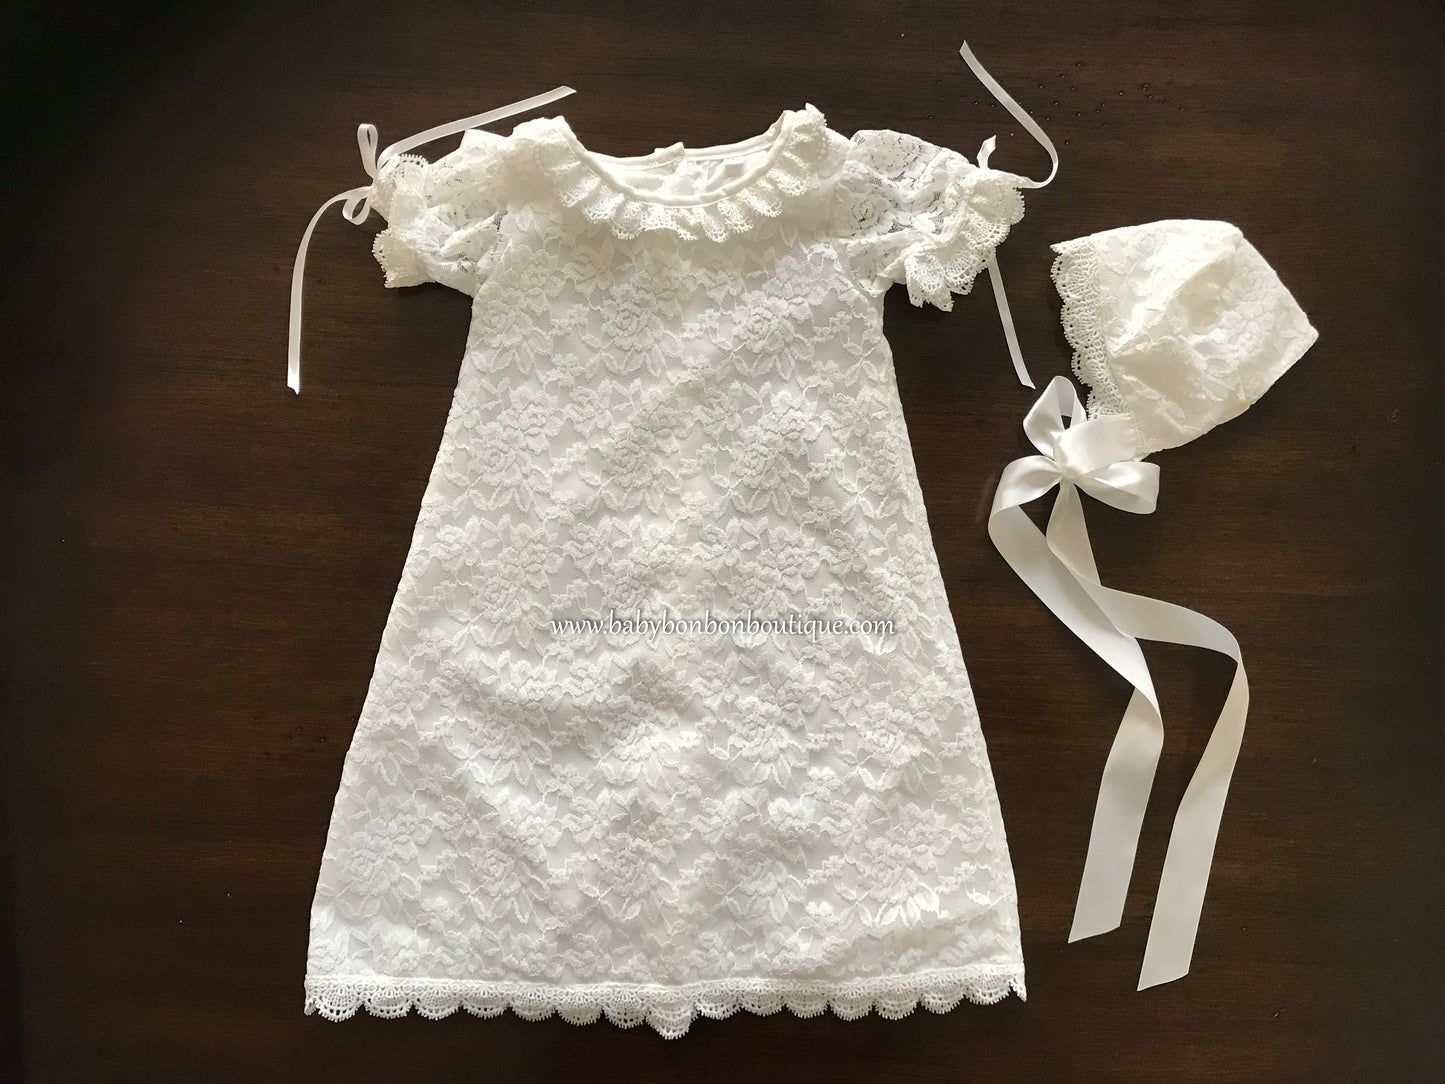 French White Lace Christening Dress and Bonnet, Belle Baptism Dress